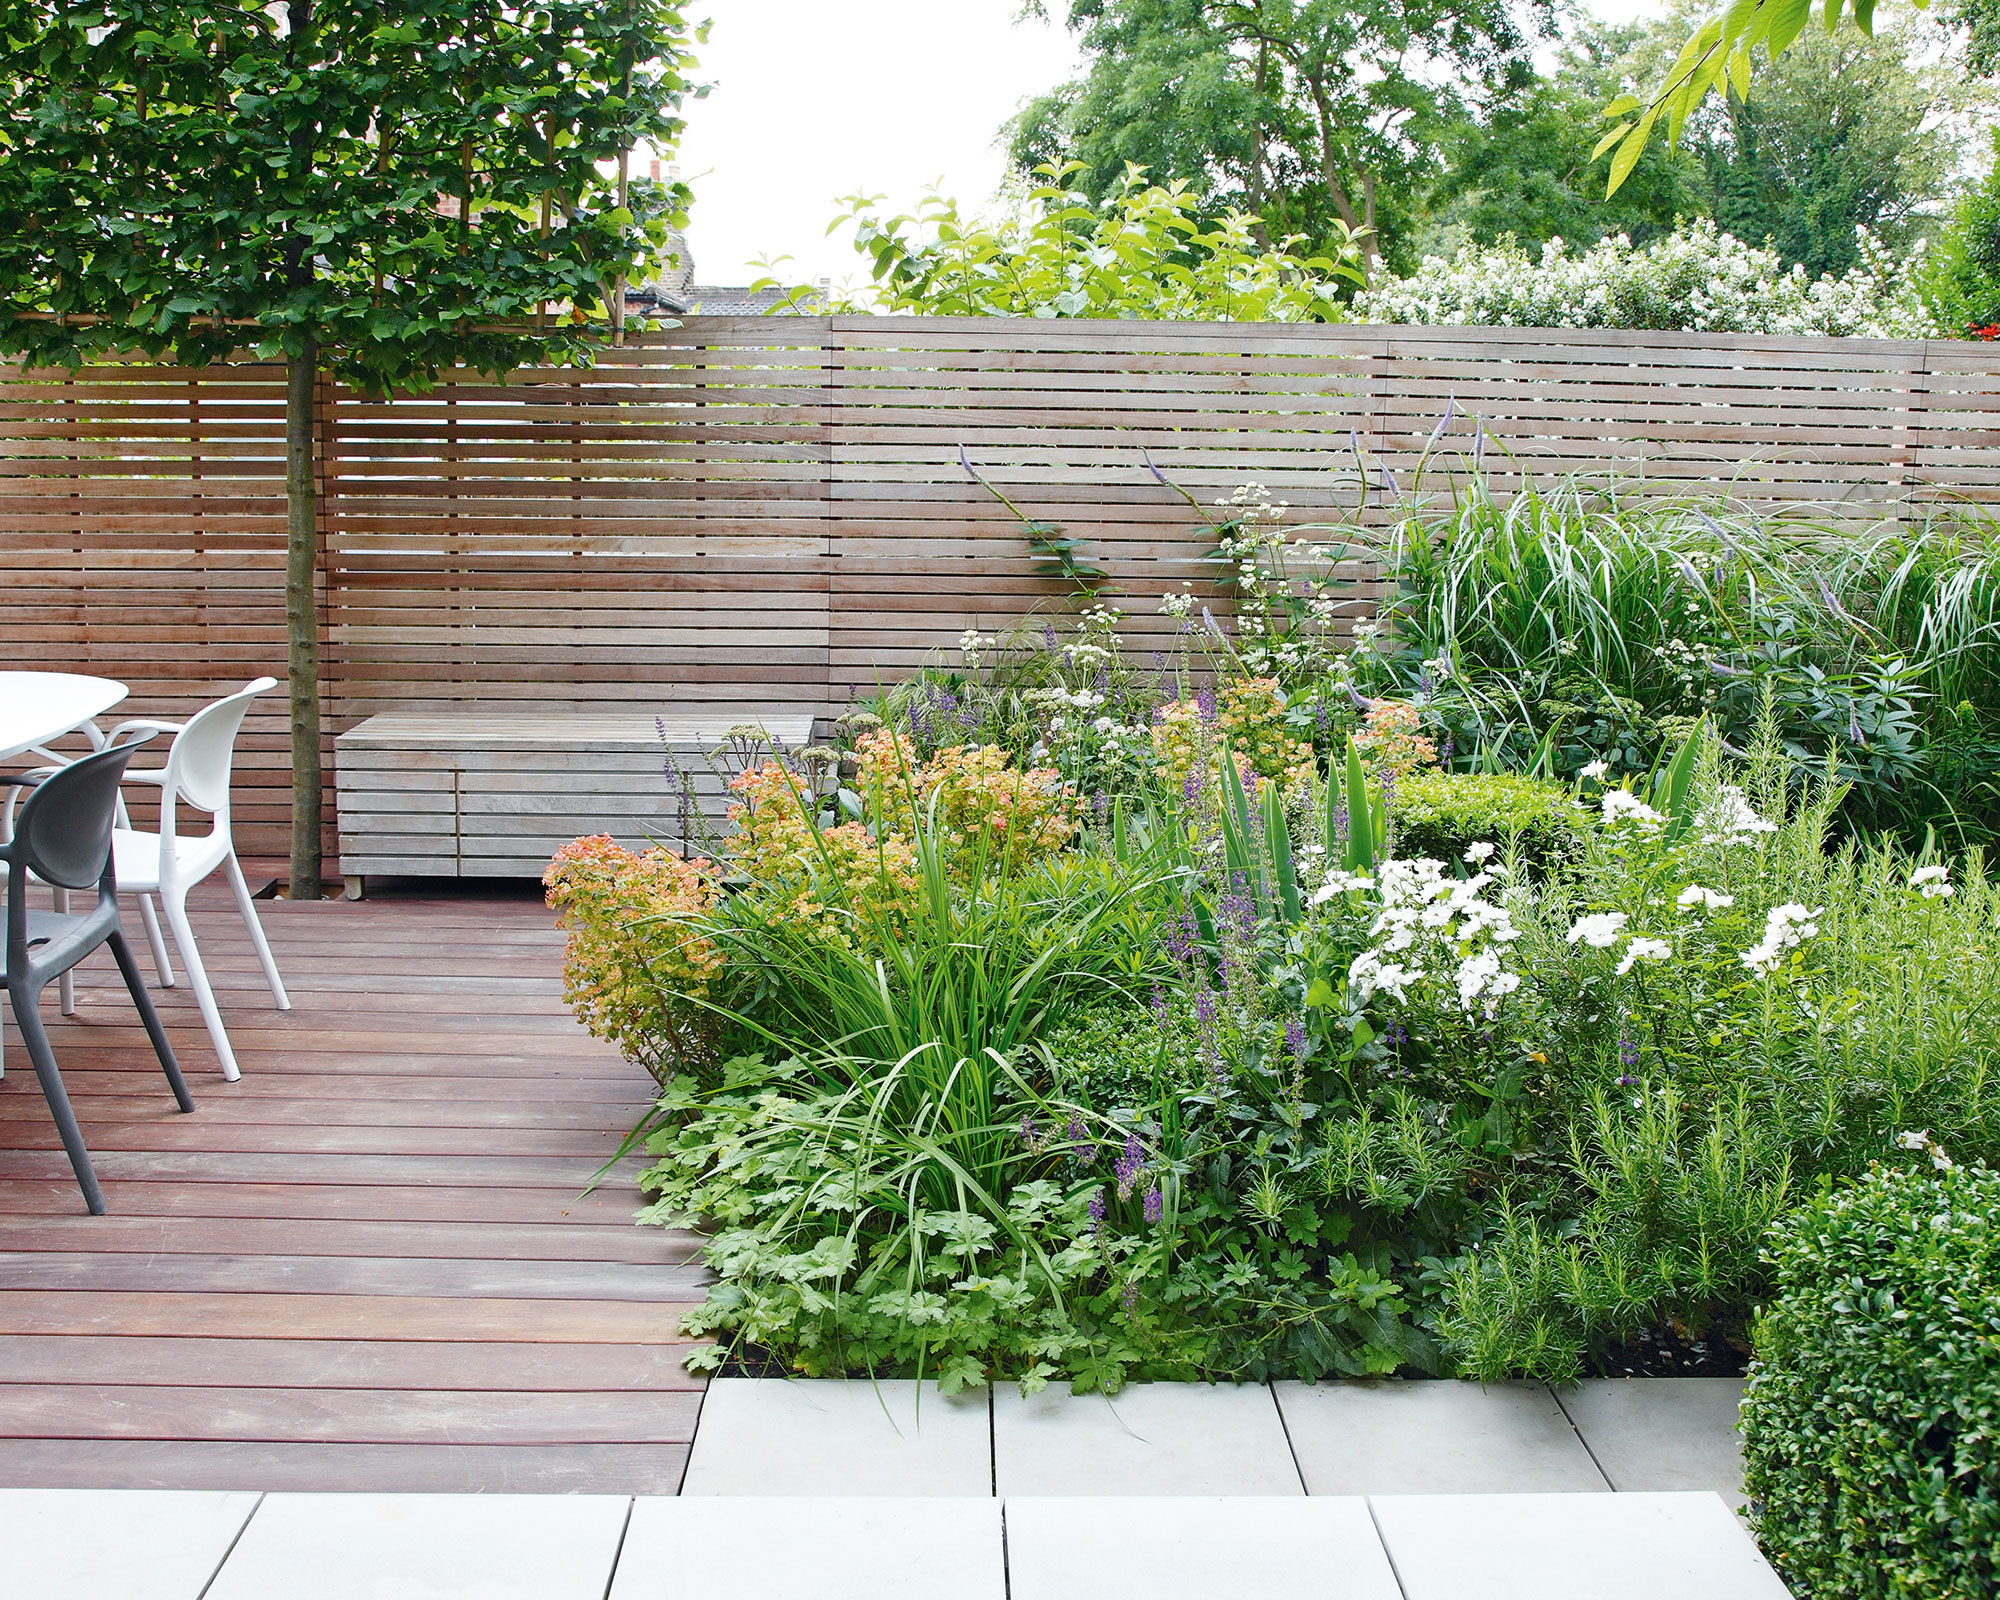 Small decking edged with greenery